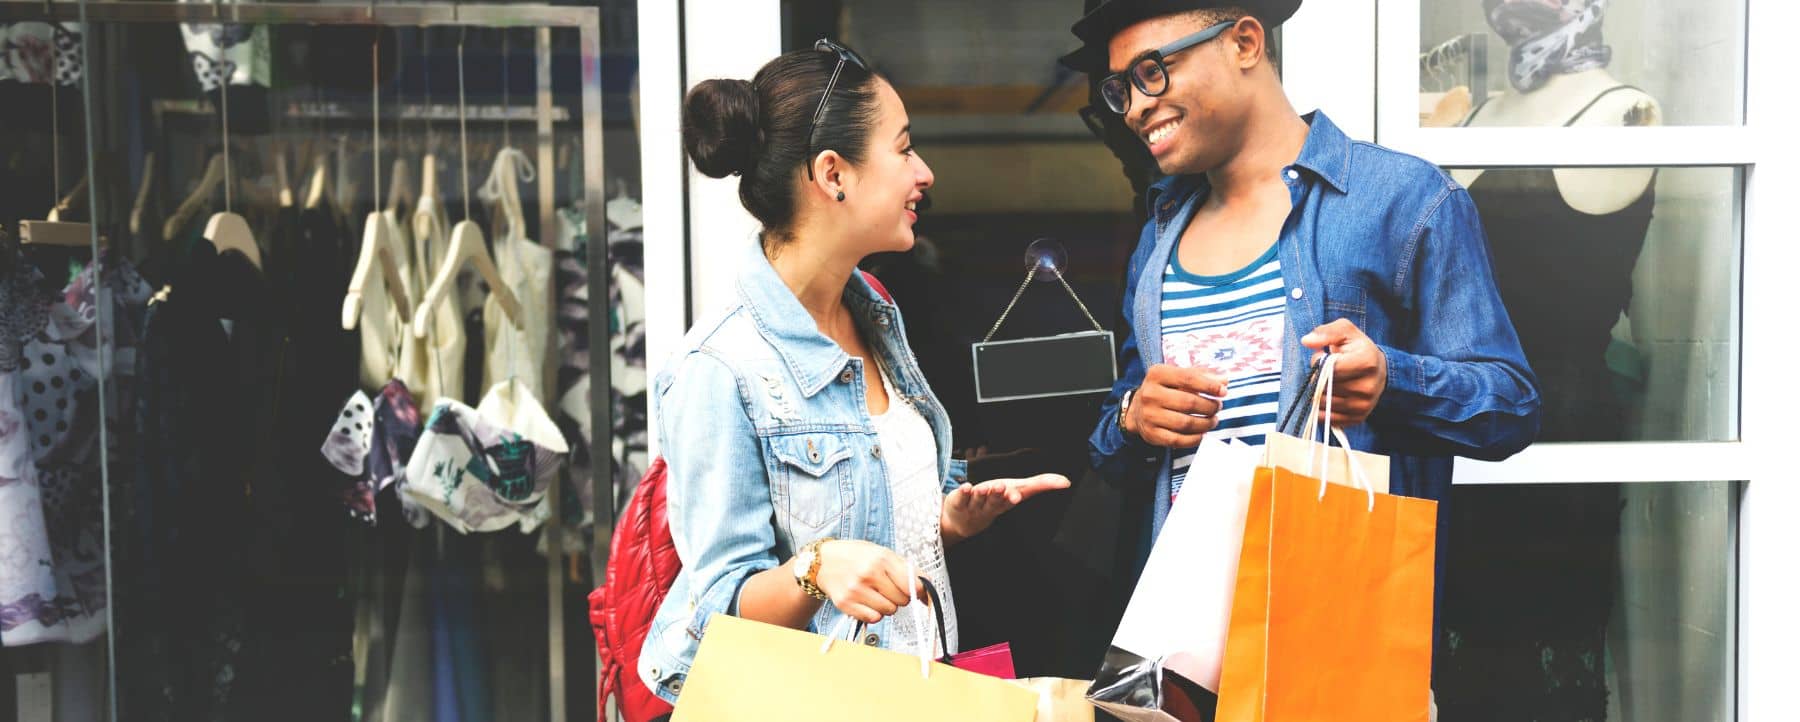 Two friends standing outside a shop, holding multicolored shopping bags and excitedly discussing a consumer promotion